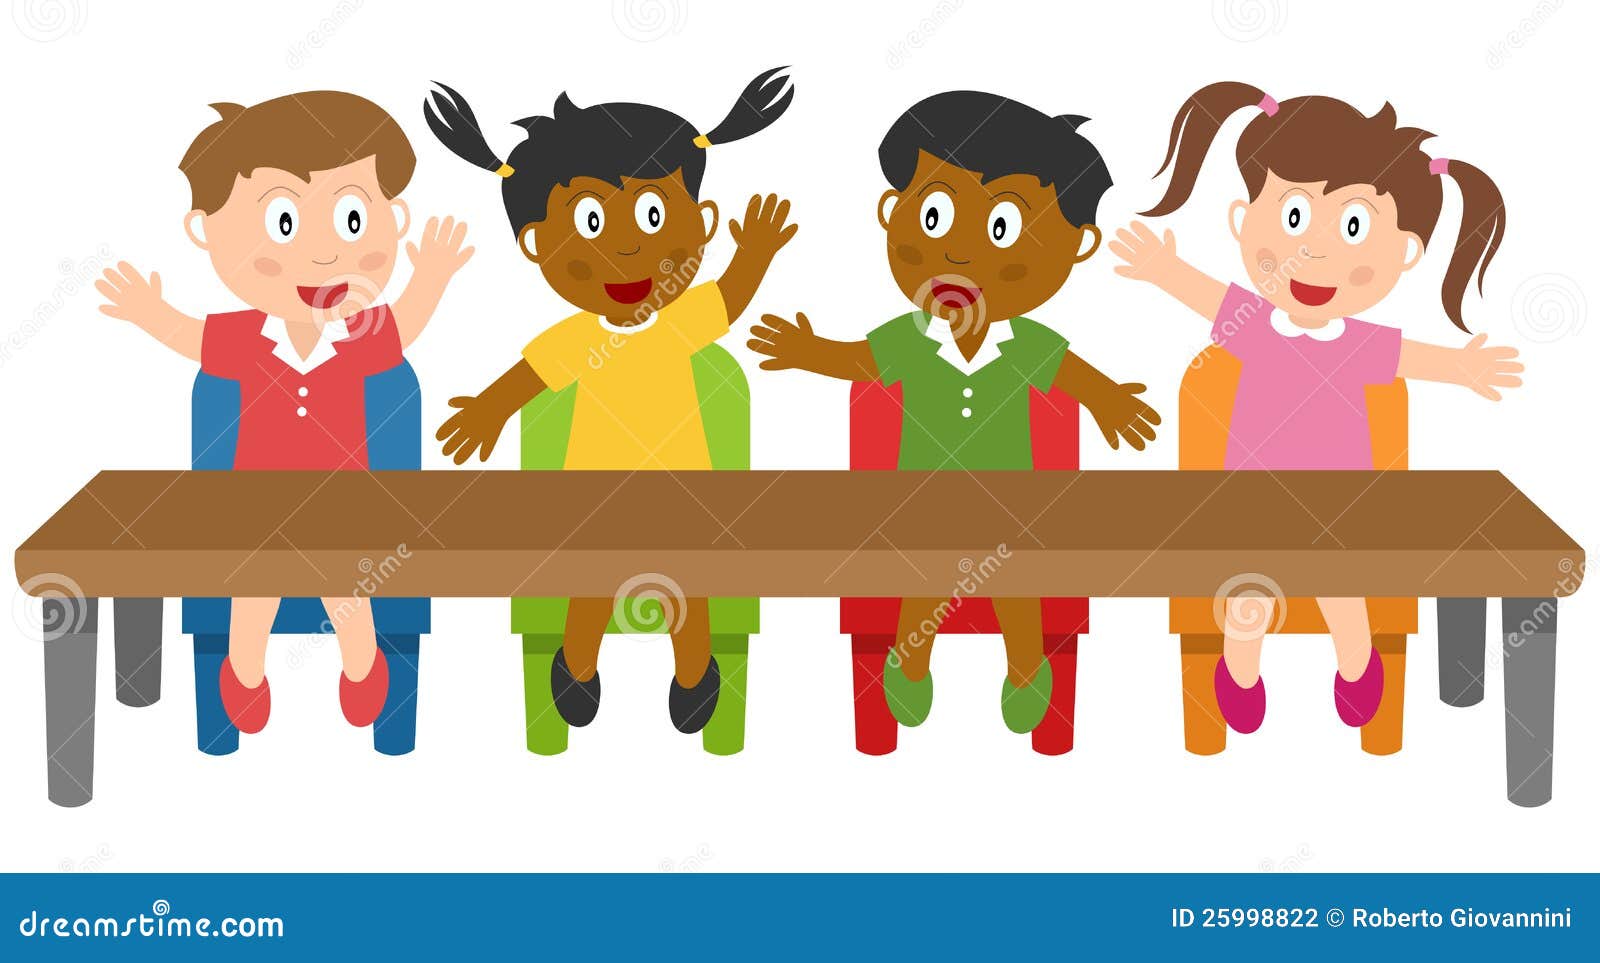 free multicultural clipart for teachers - photo #35